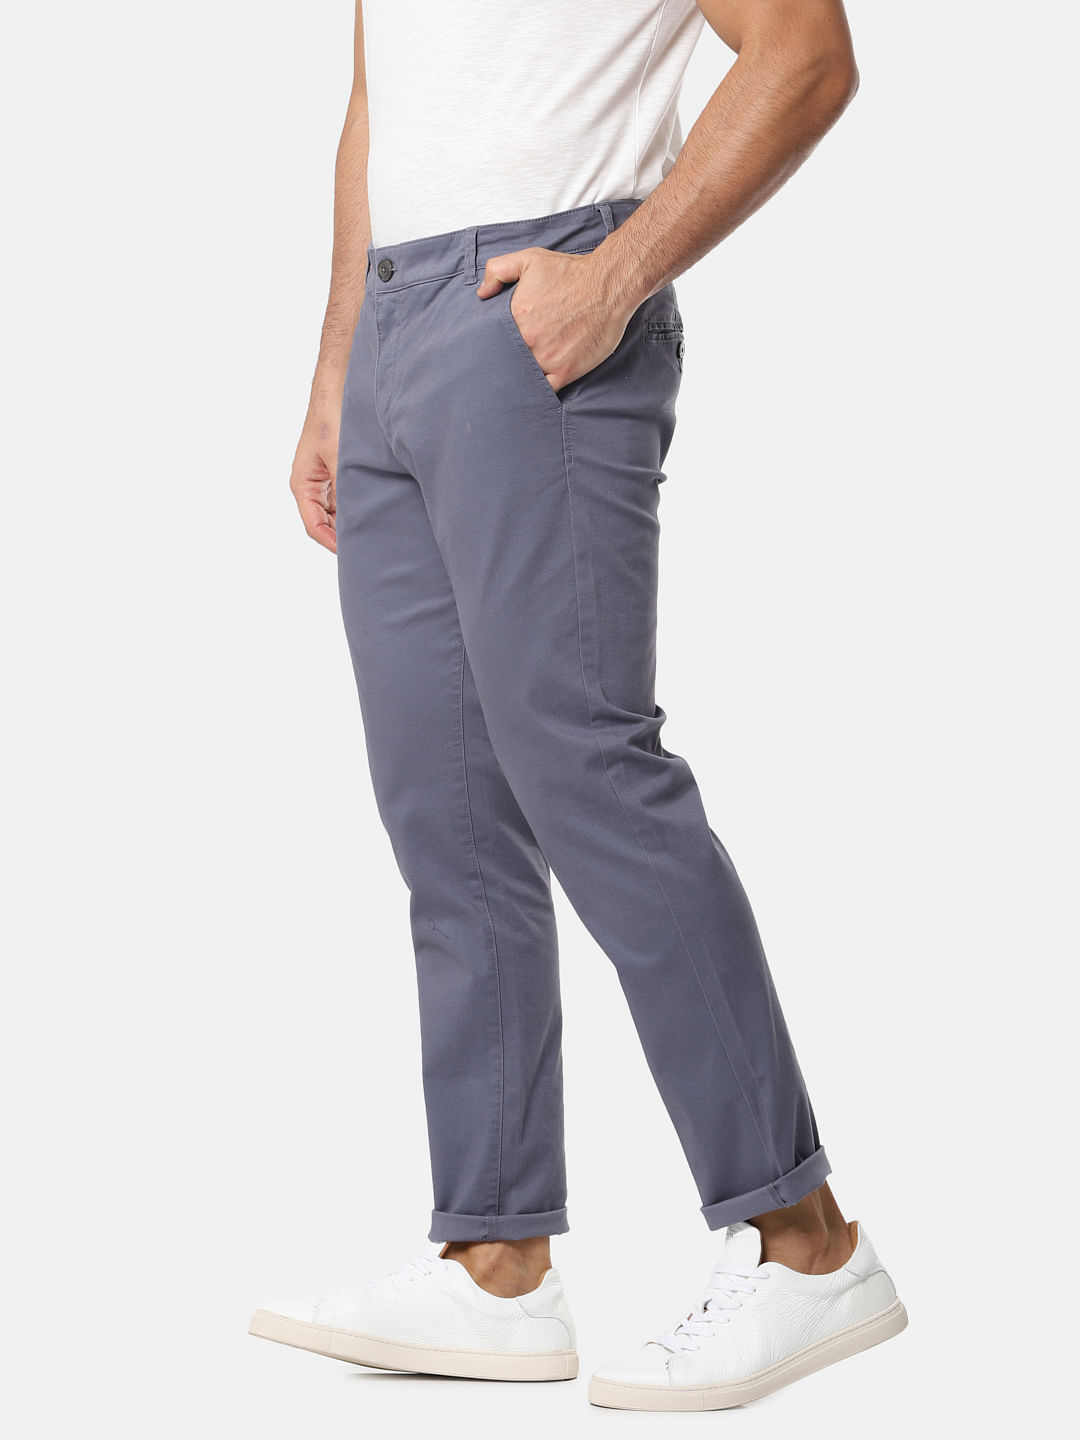 Marco 1400 men's chinos - Blue - Buy online at NN.07®